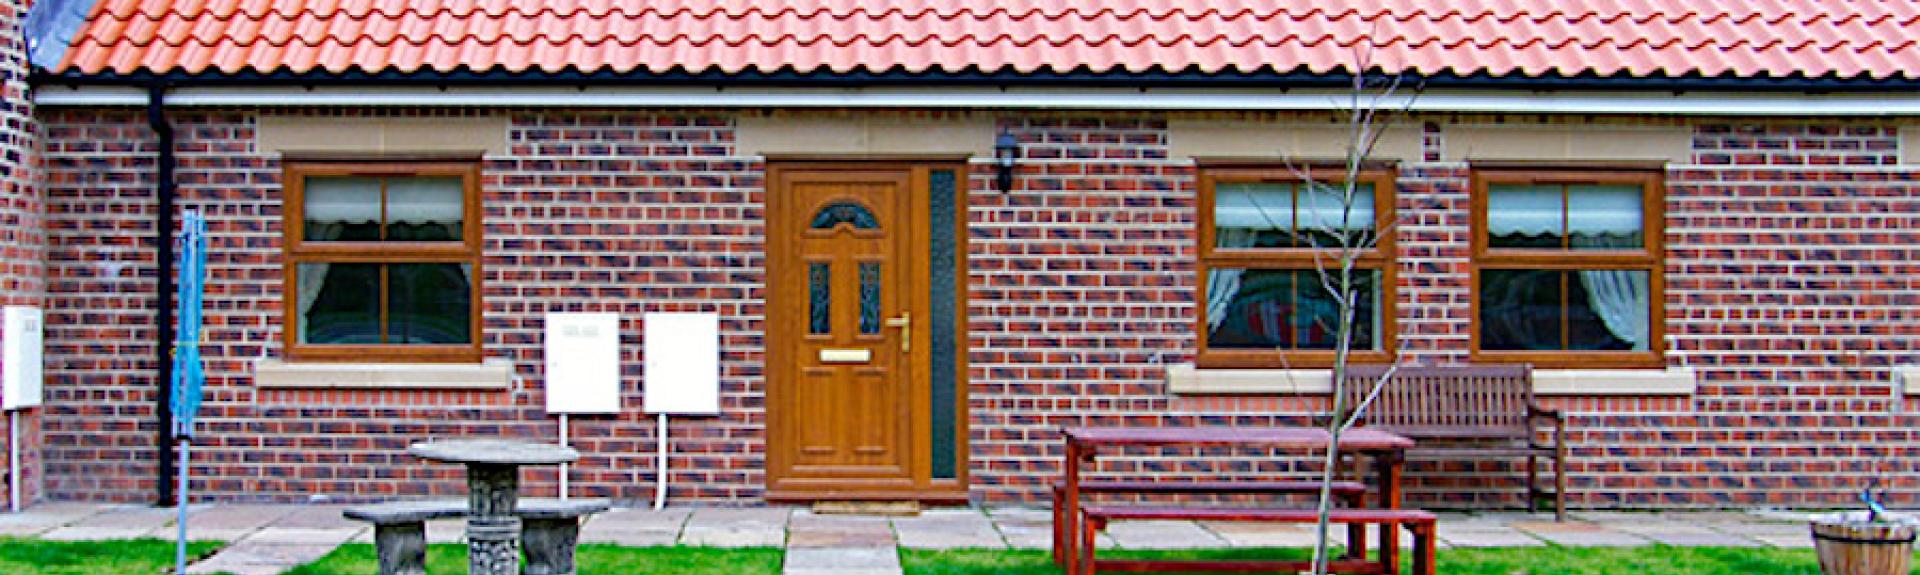 A paved footpath leads to the fron tdoor of a single-storey, brick-built Skinningrove holiday cottage